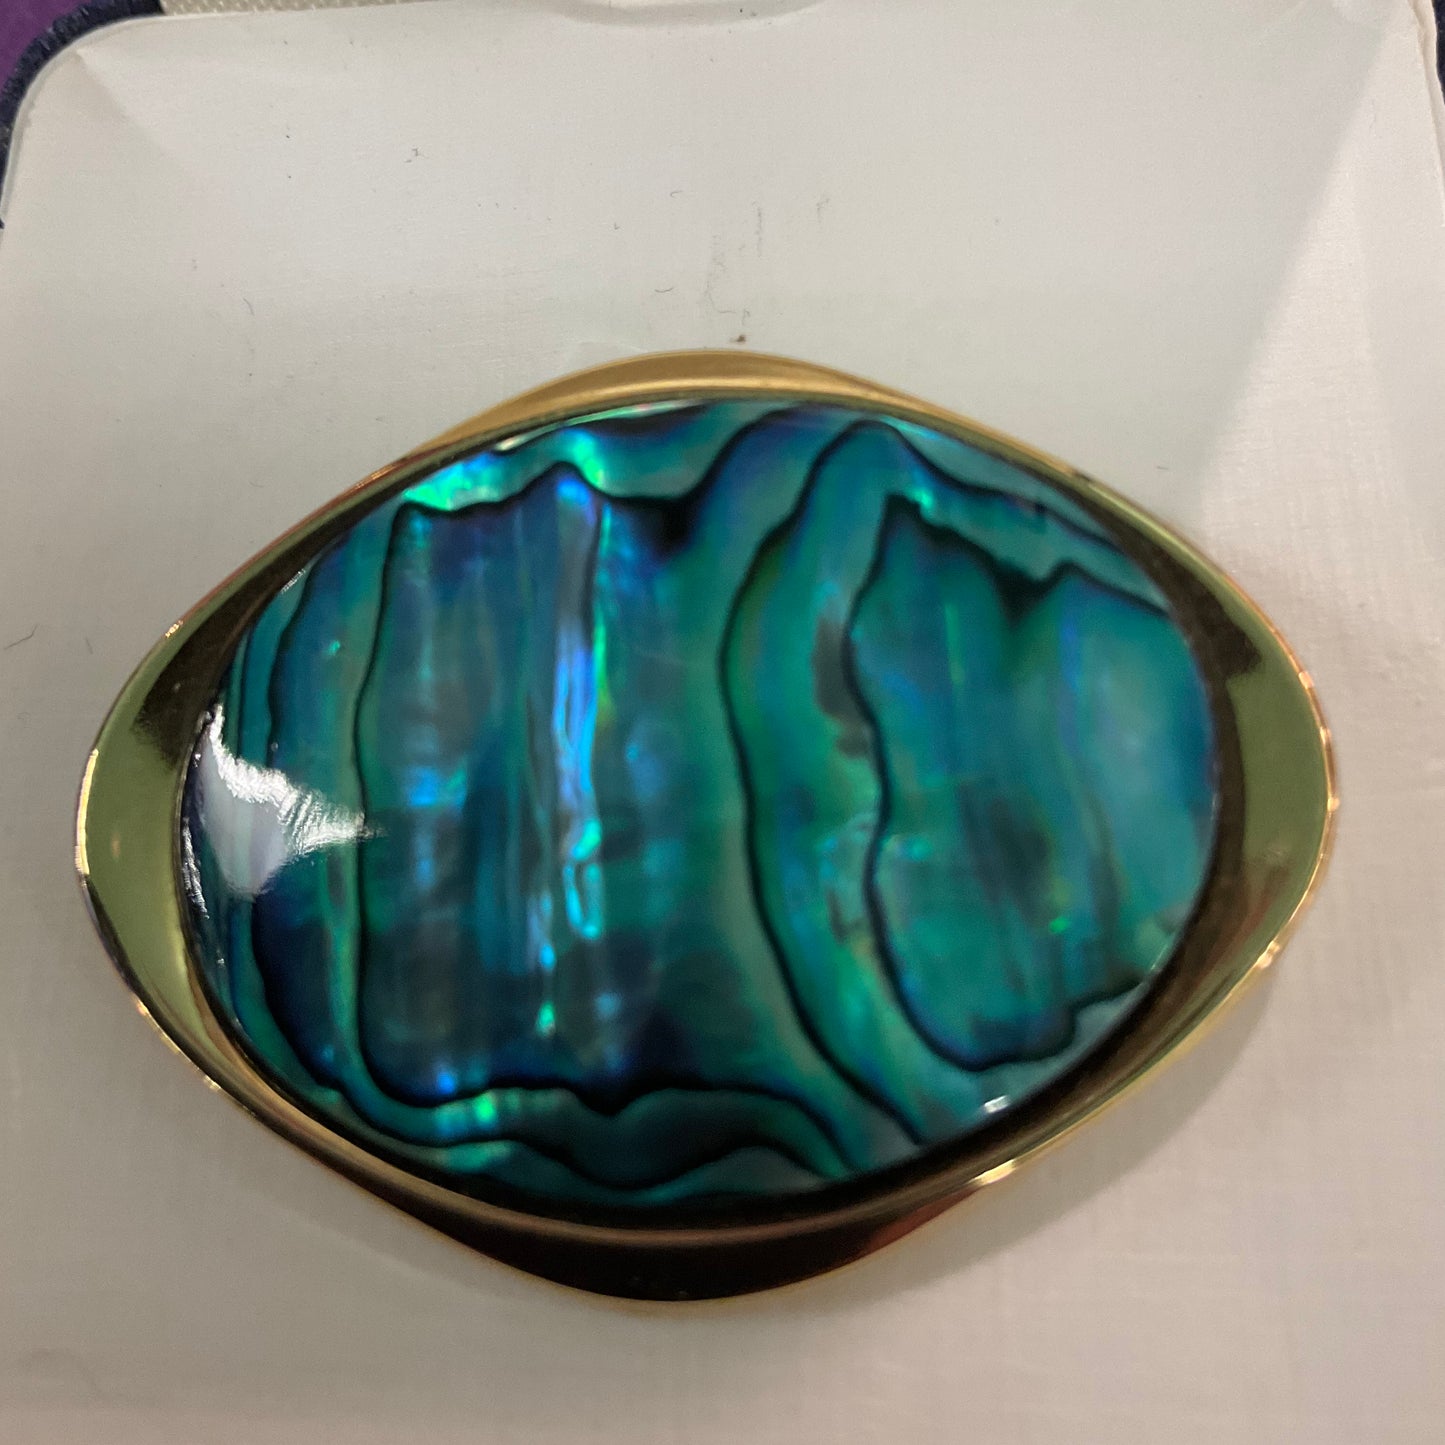 Vintage Gold Plated Abalone Shell Brooch In Original Box